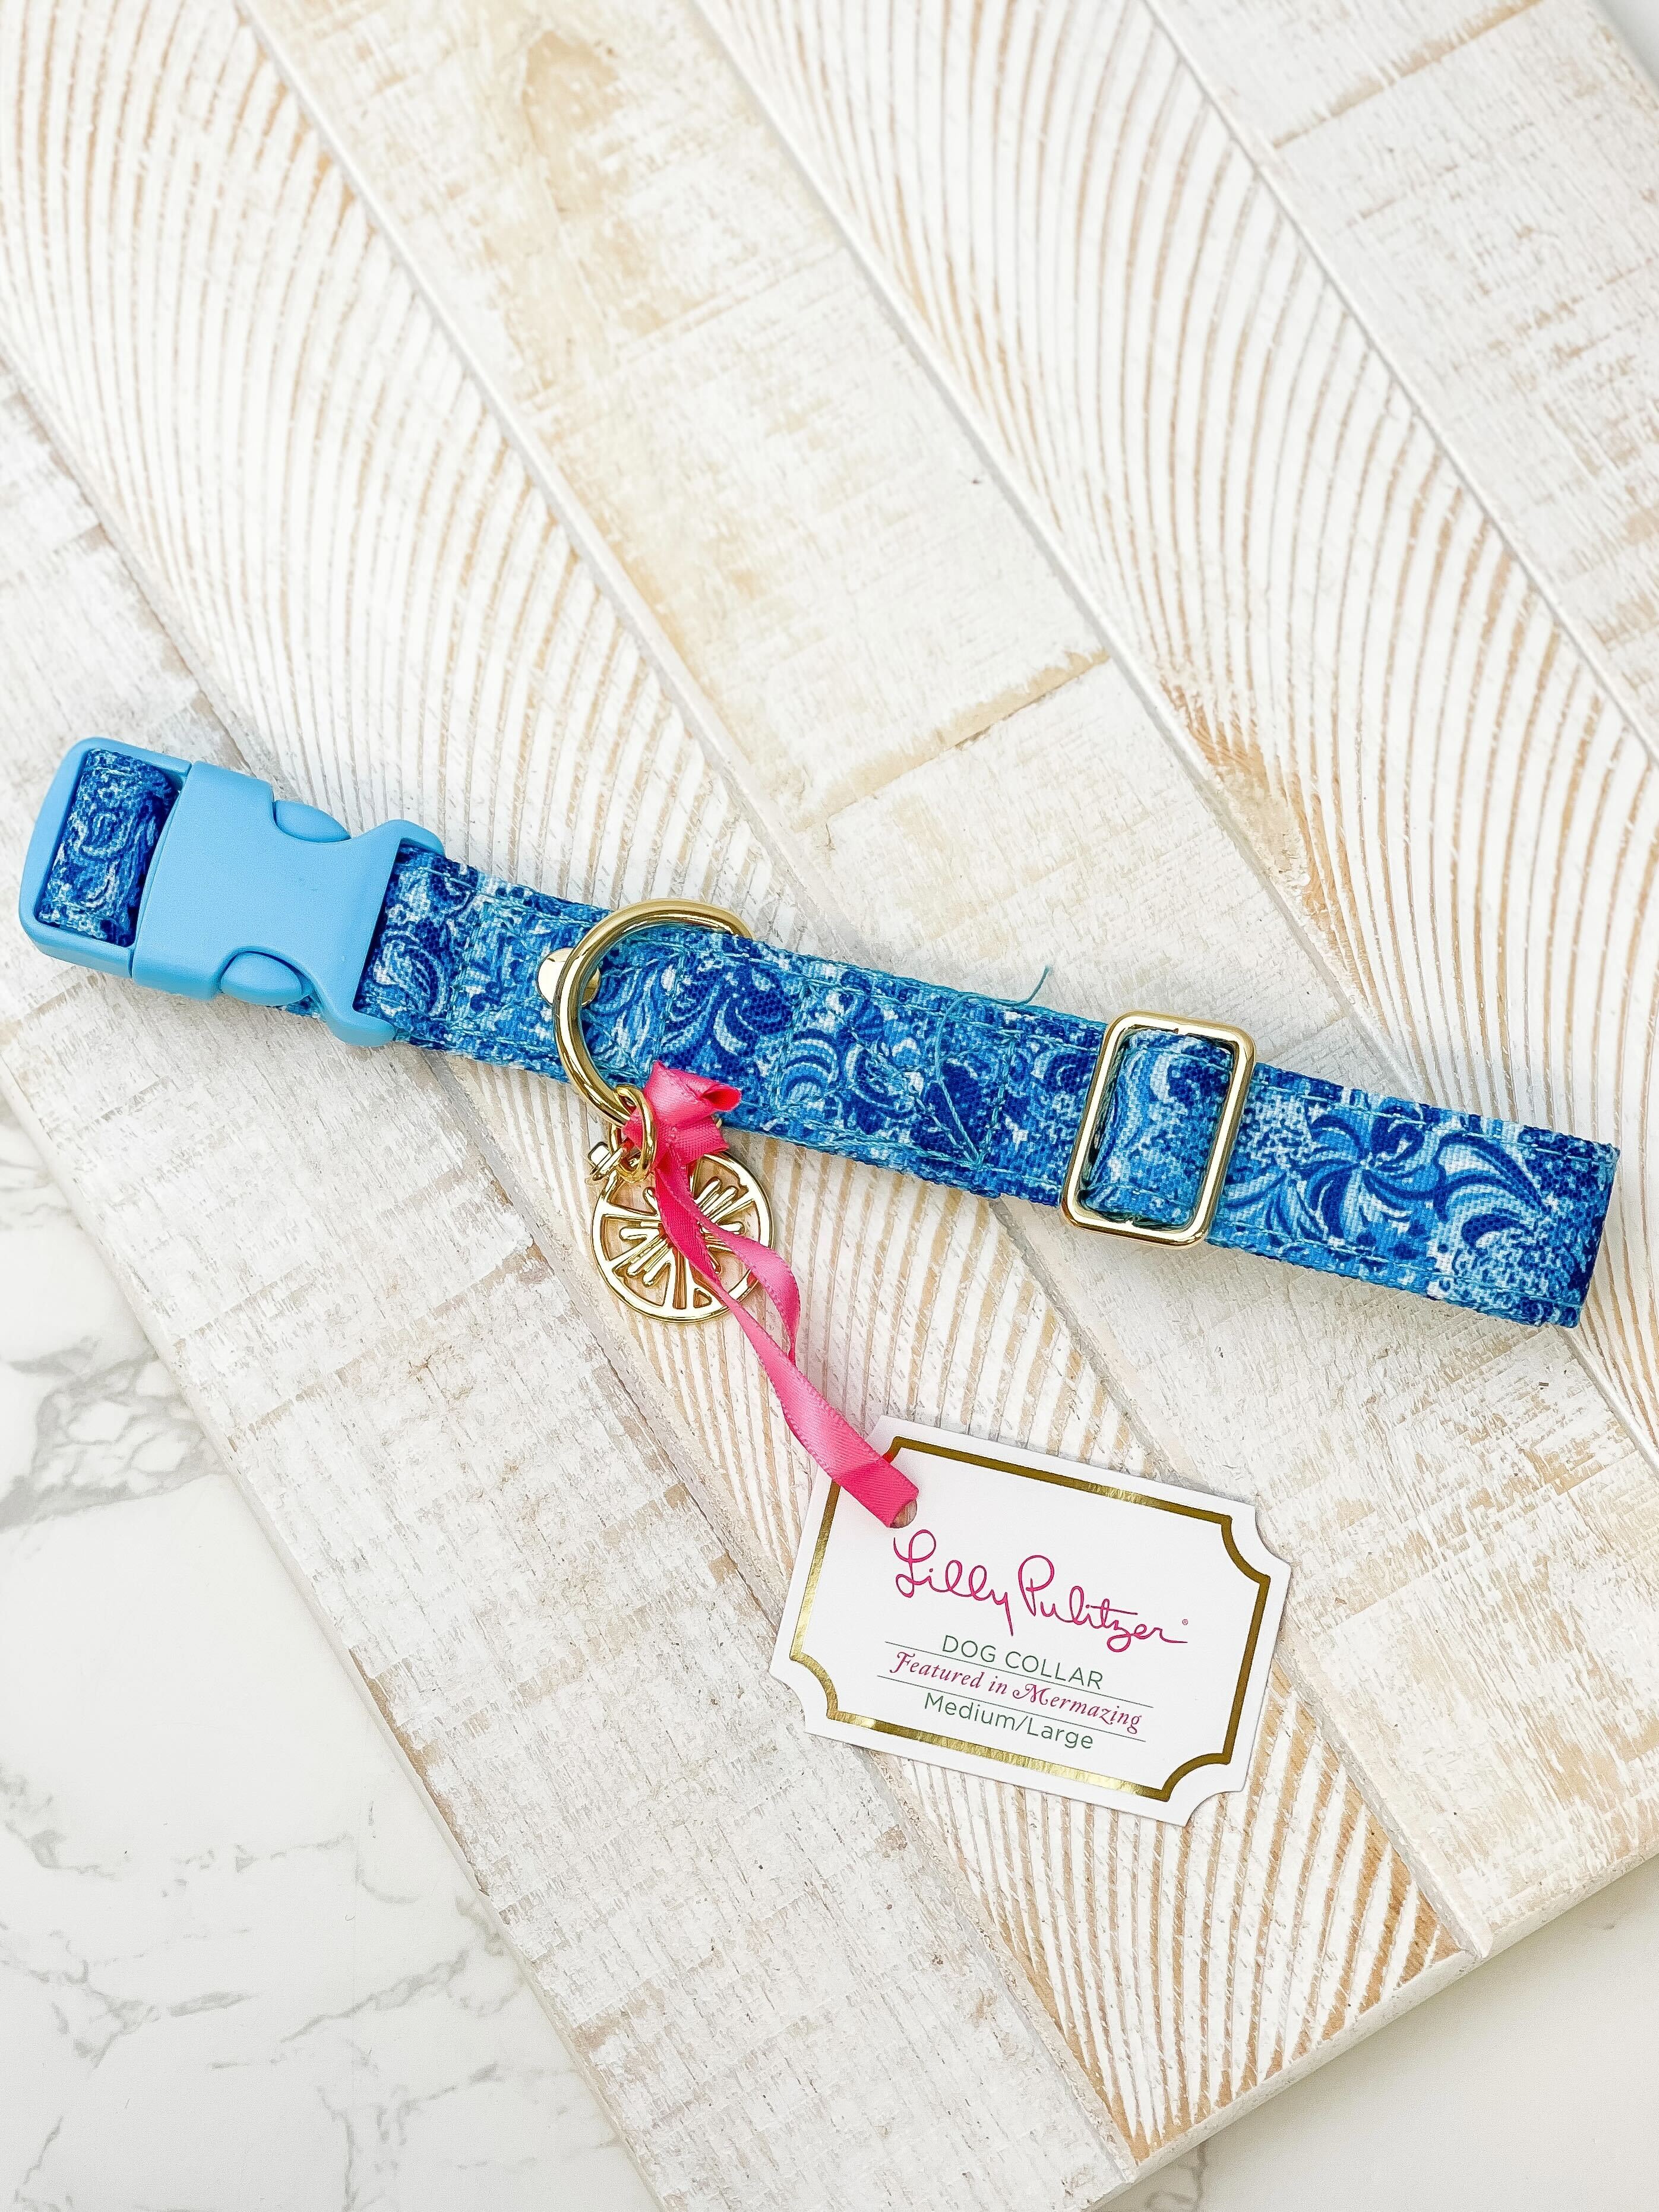 Dog Collar by Lilly Pulitzer - Mermazing (M/L)